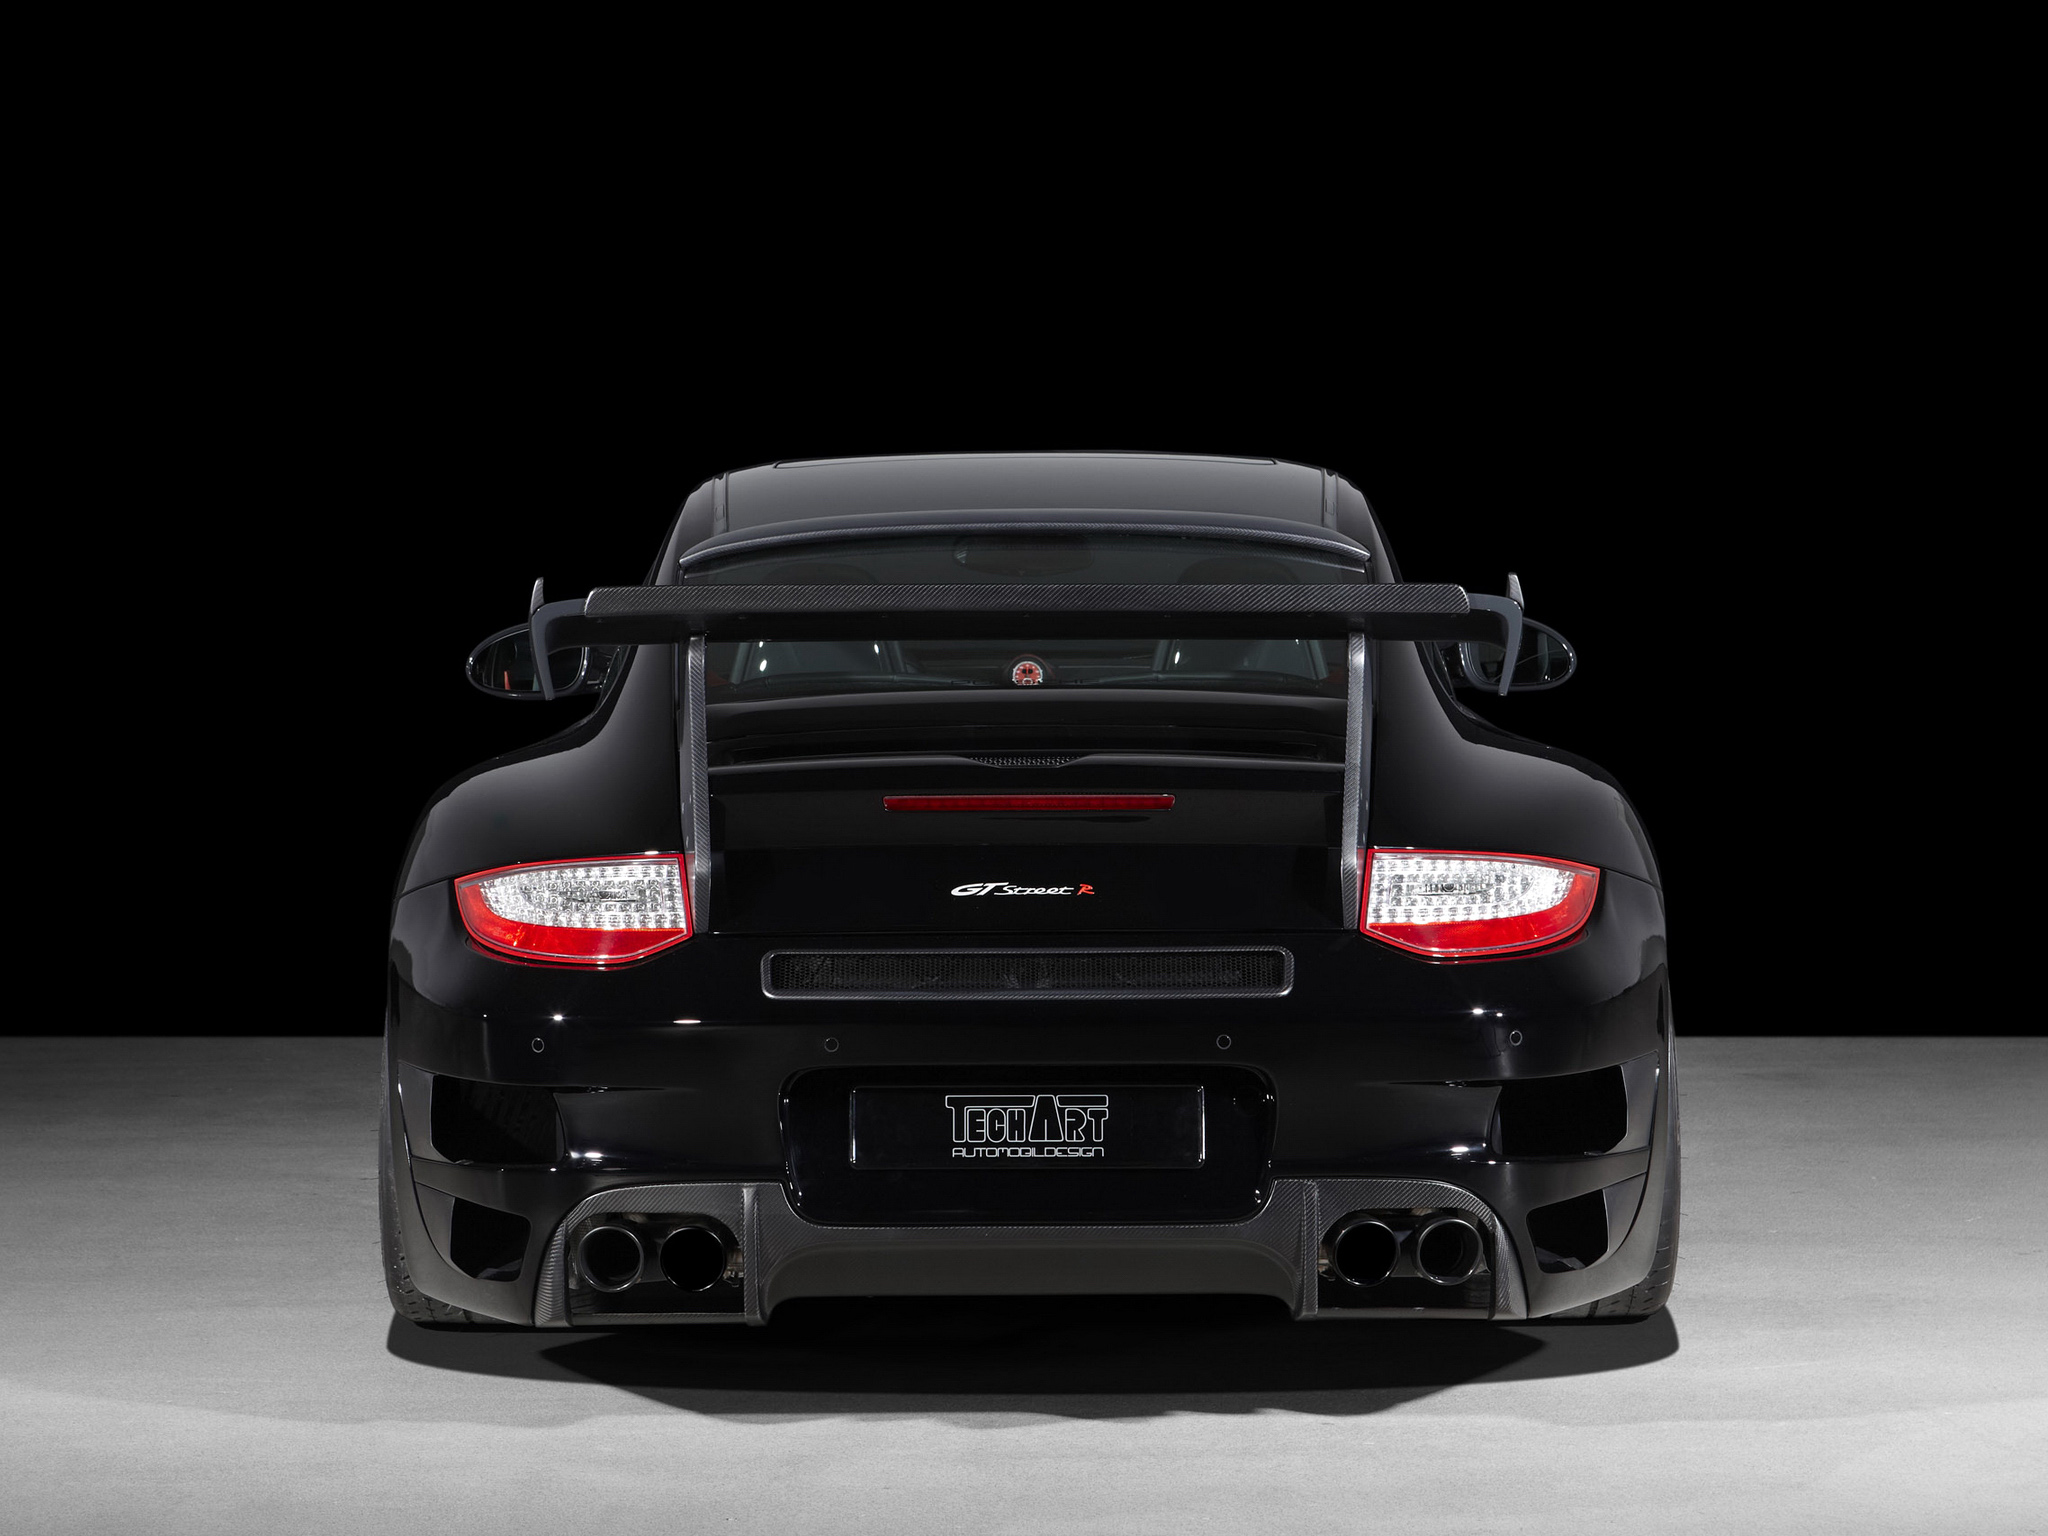 Download High quality GT street black coupe back Porshe wallpaper / 2048x1536